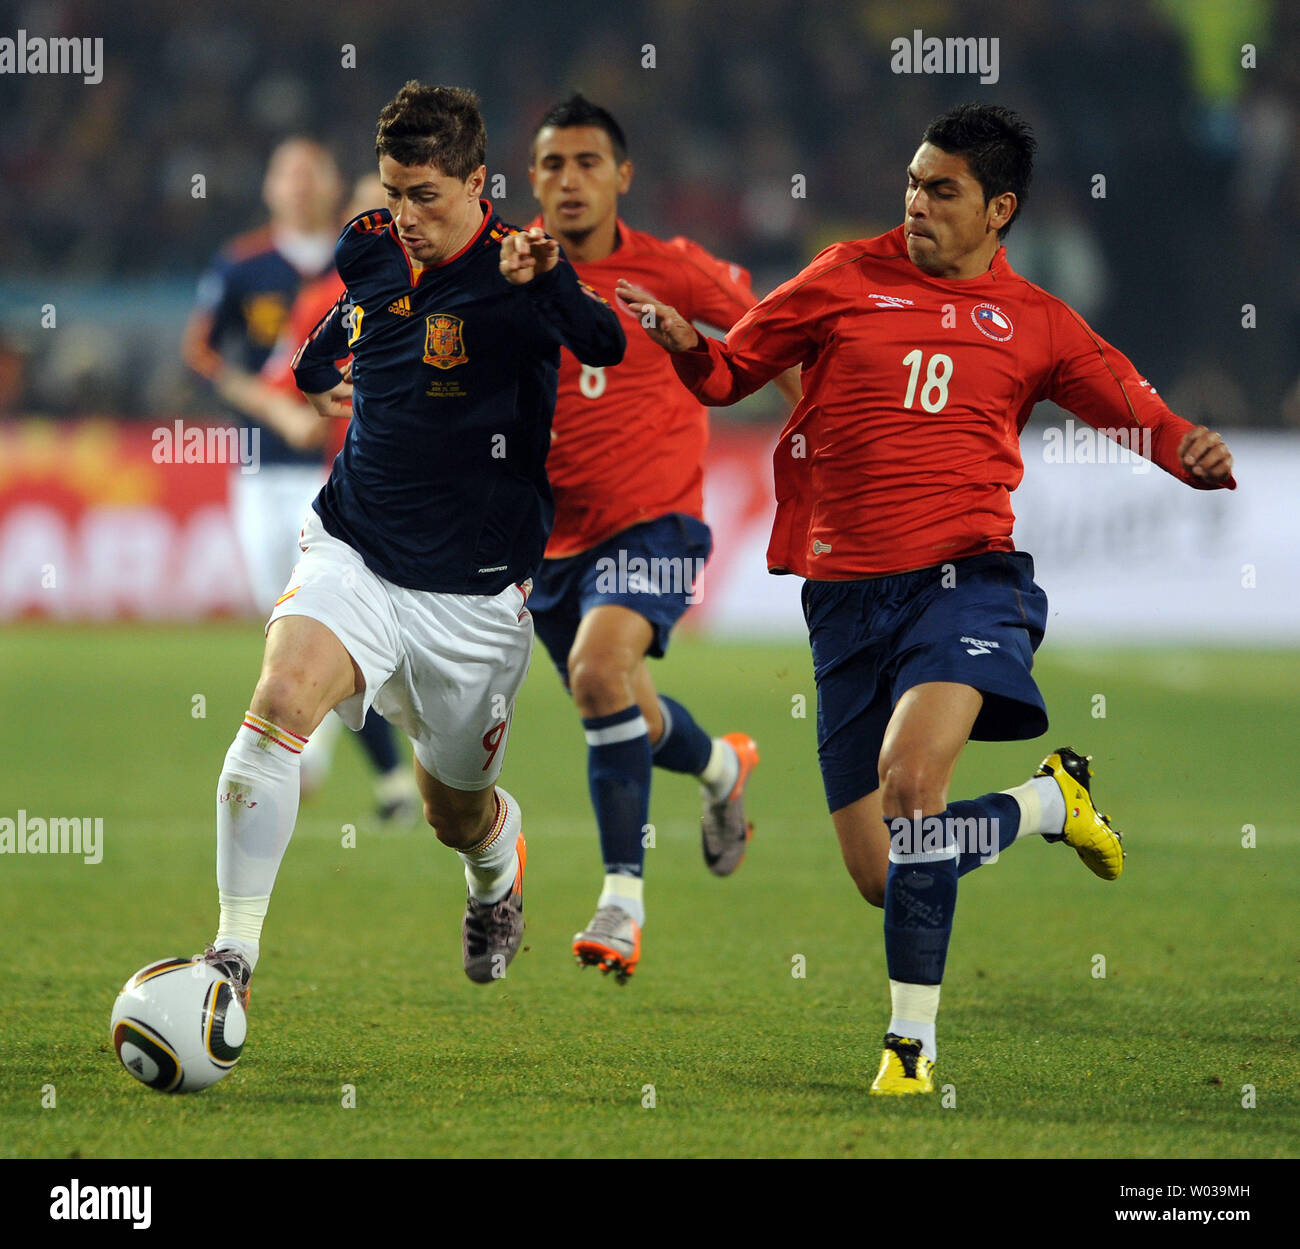 Gonzalo Jara of Chile and Fernando Torres of Spain chase the ball during the Group H match at the Loftus Versfeld Stadium in Pretoria, South Africa on June 25, 2010. UPI/Chris Brunskill Stock Photo